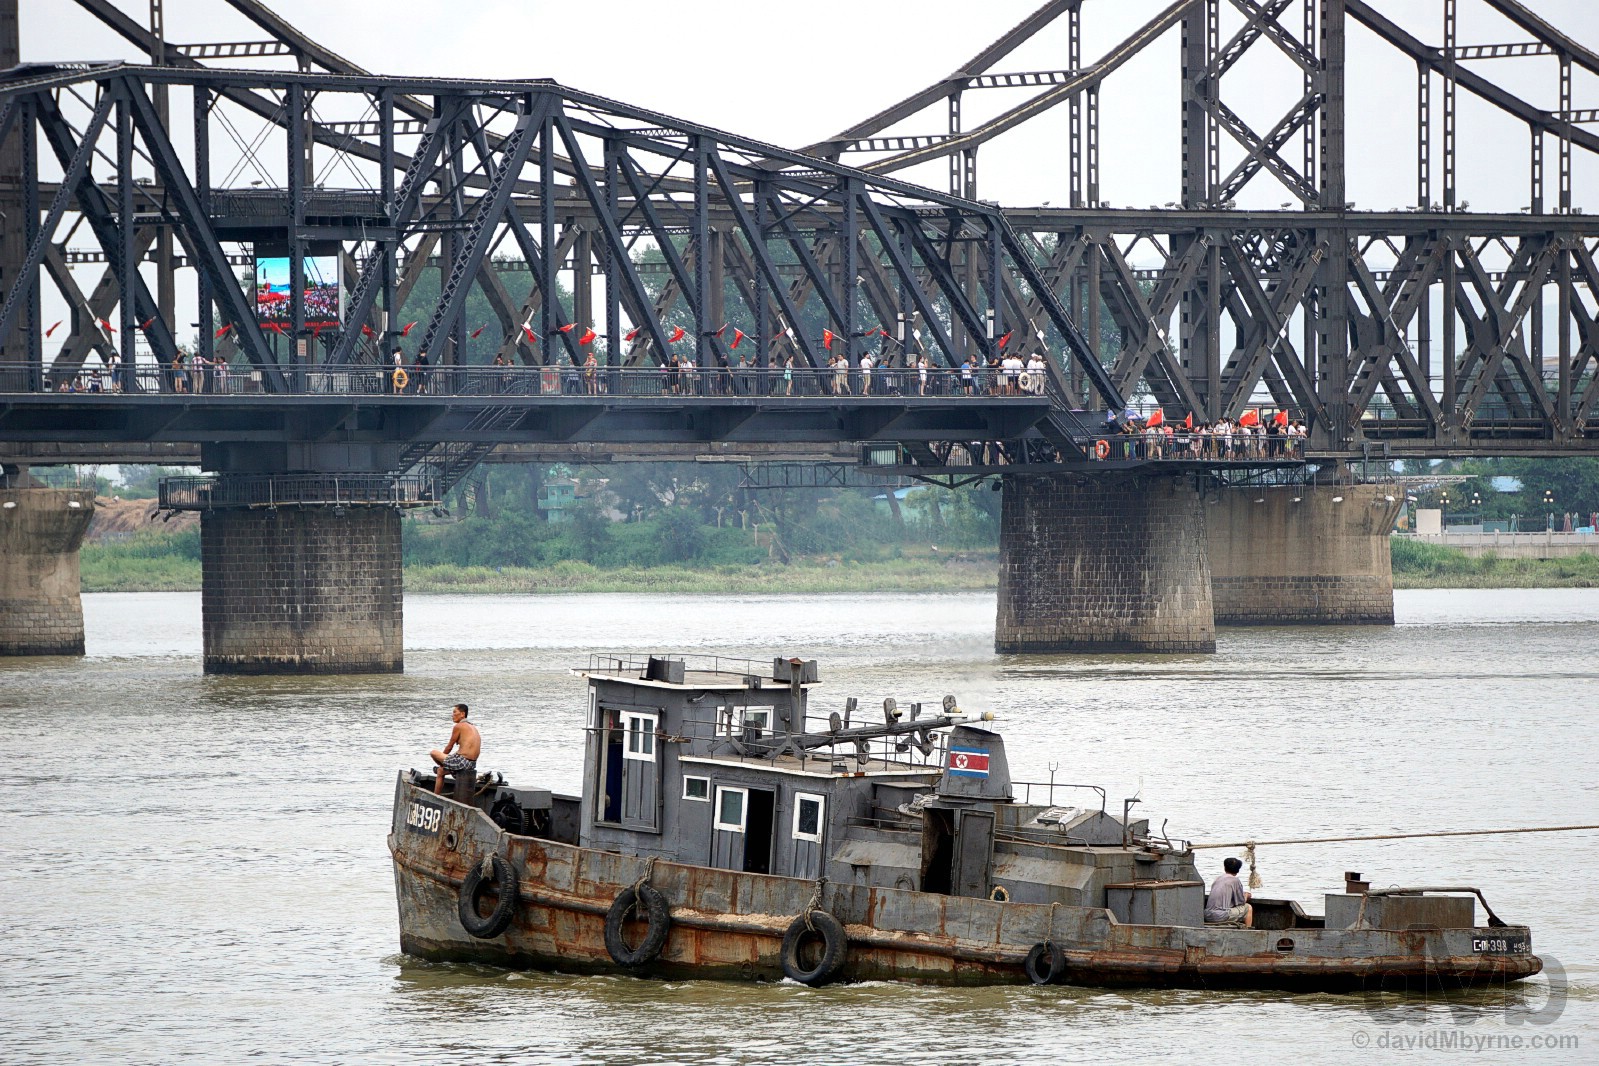 A North Korean-registered tug boat plies the Yalu River with the Broken Bridge in the background as seen from Dandong, Liaoning province, China. August 13, 2017.